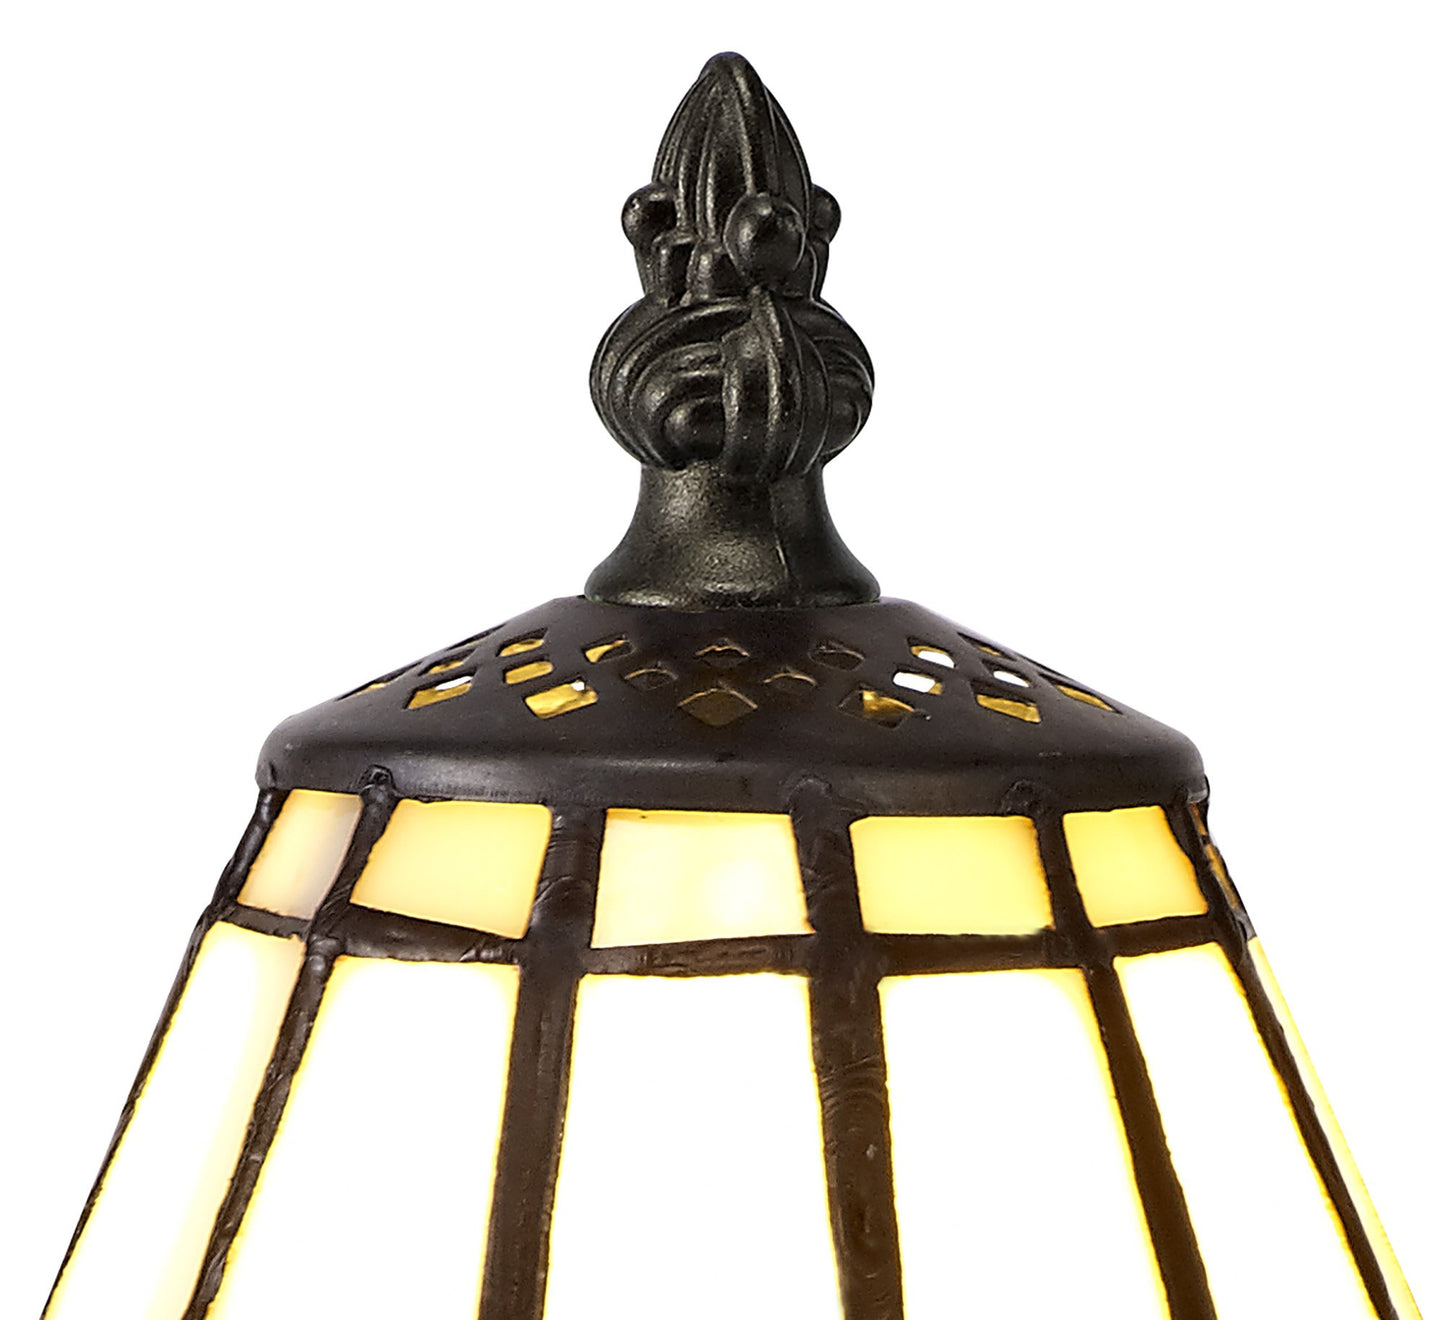 Chamber Small Table Lamp